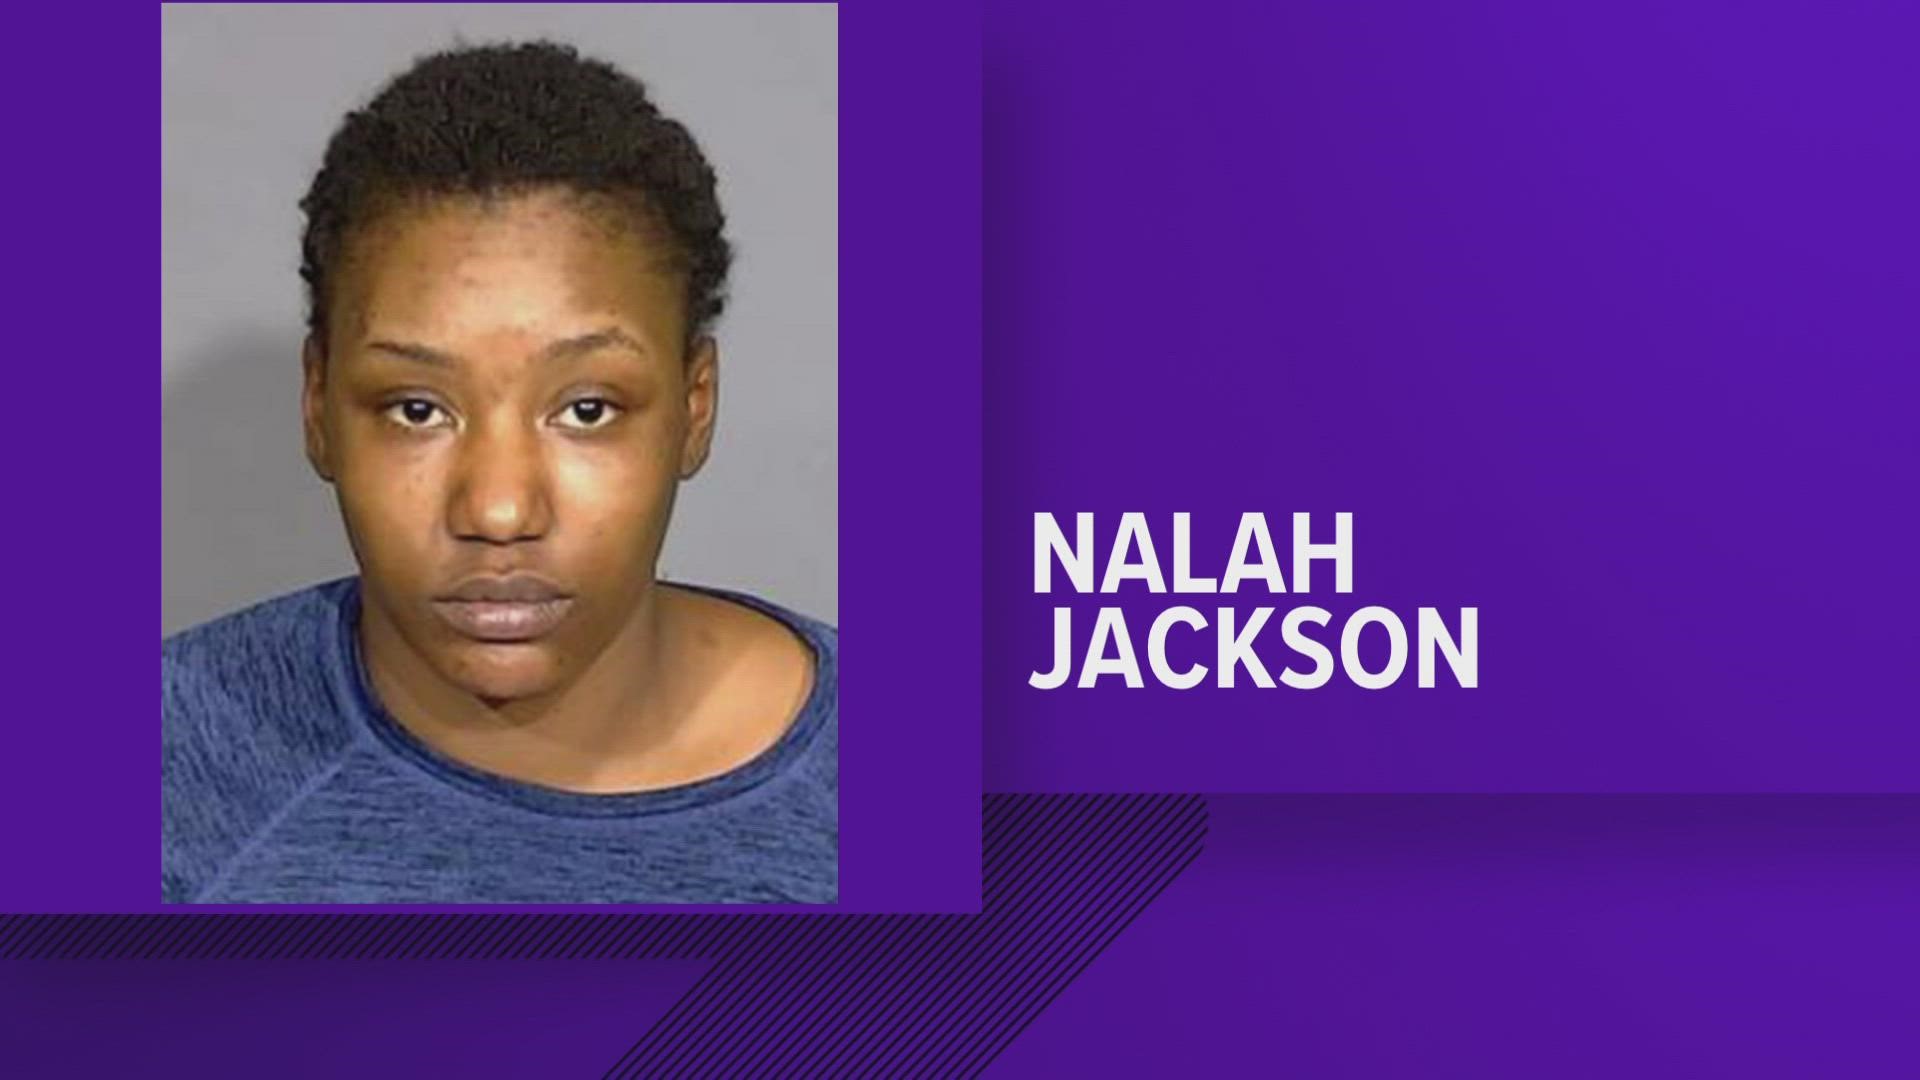 A federal grand jury indicted Nalah Jackson on two counts of kidnapping a minor.